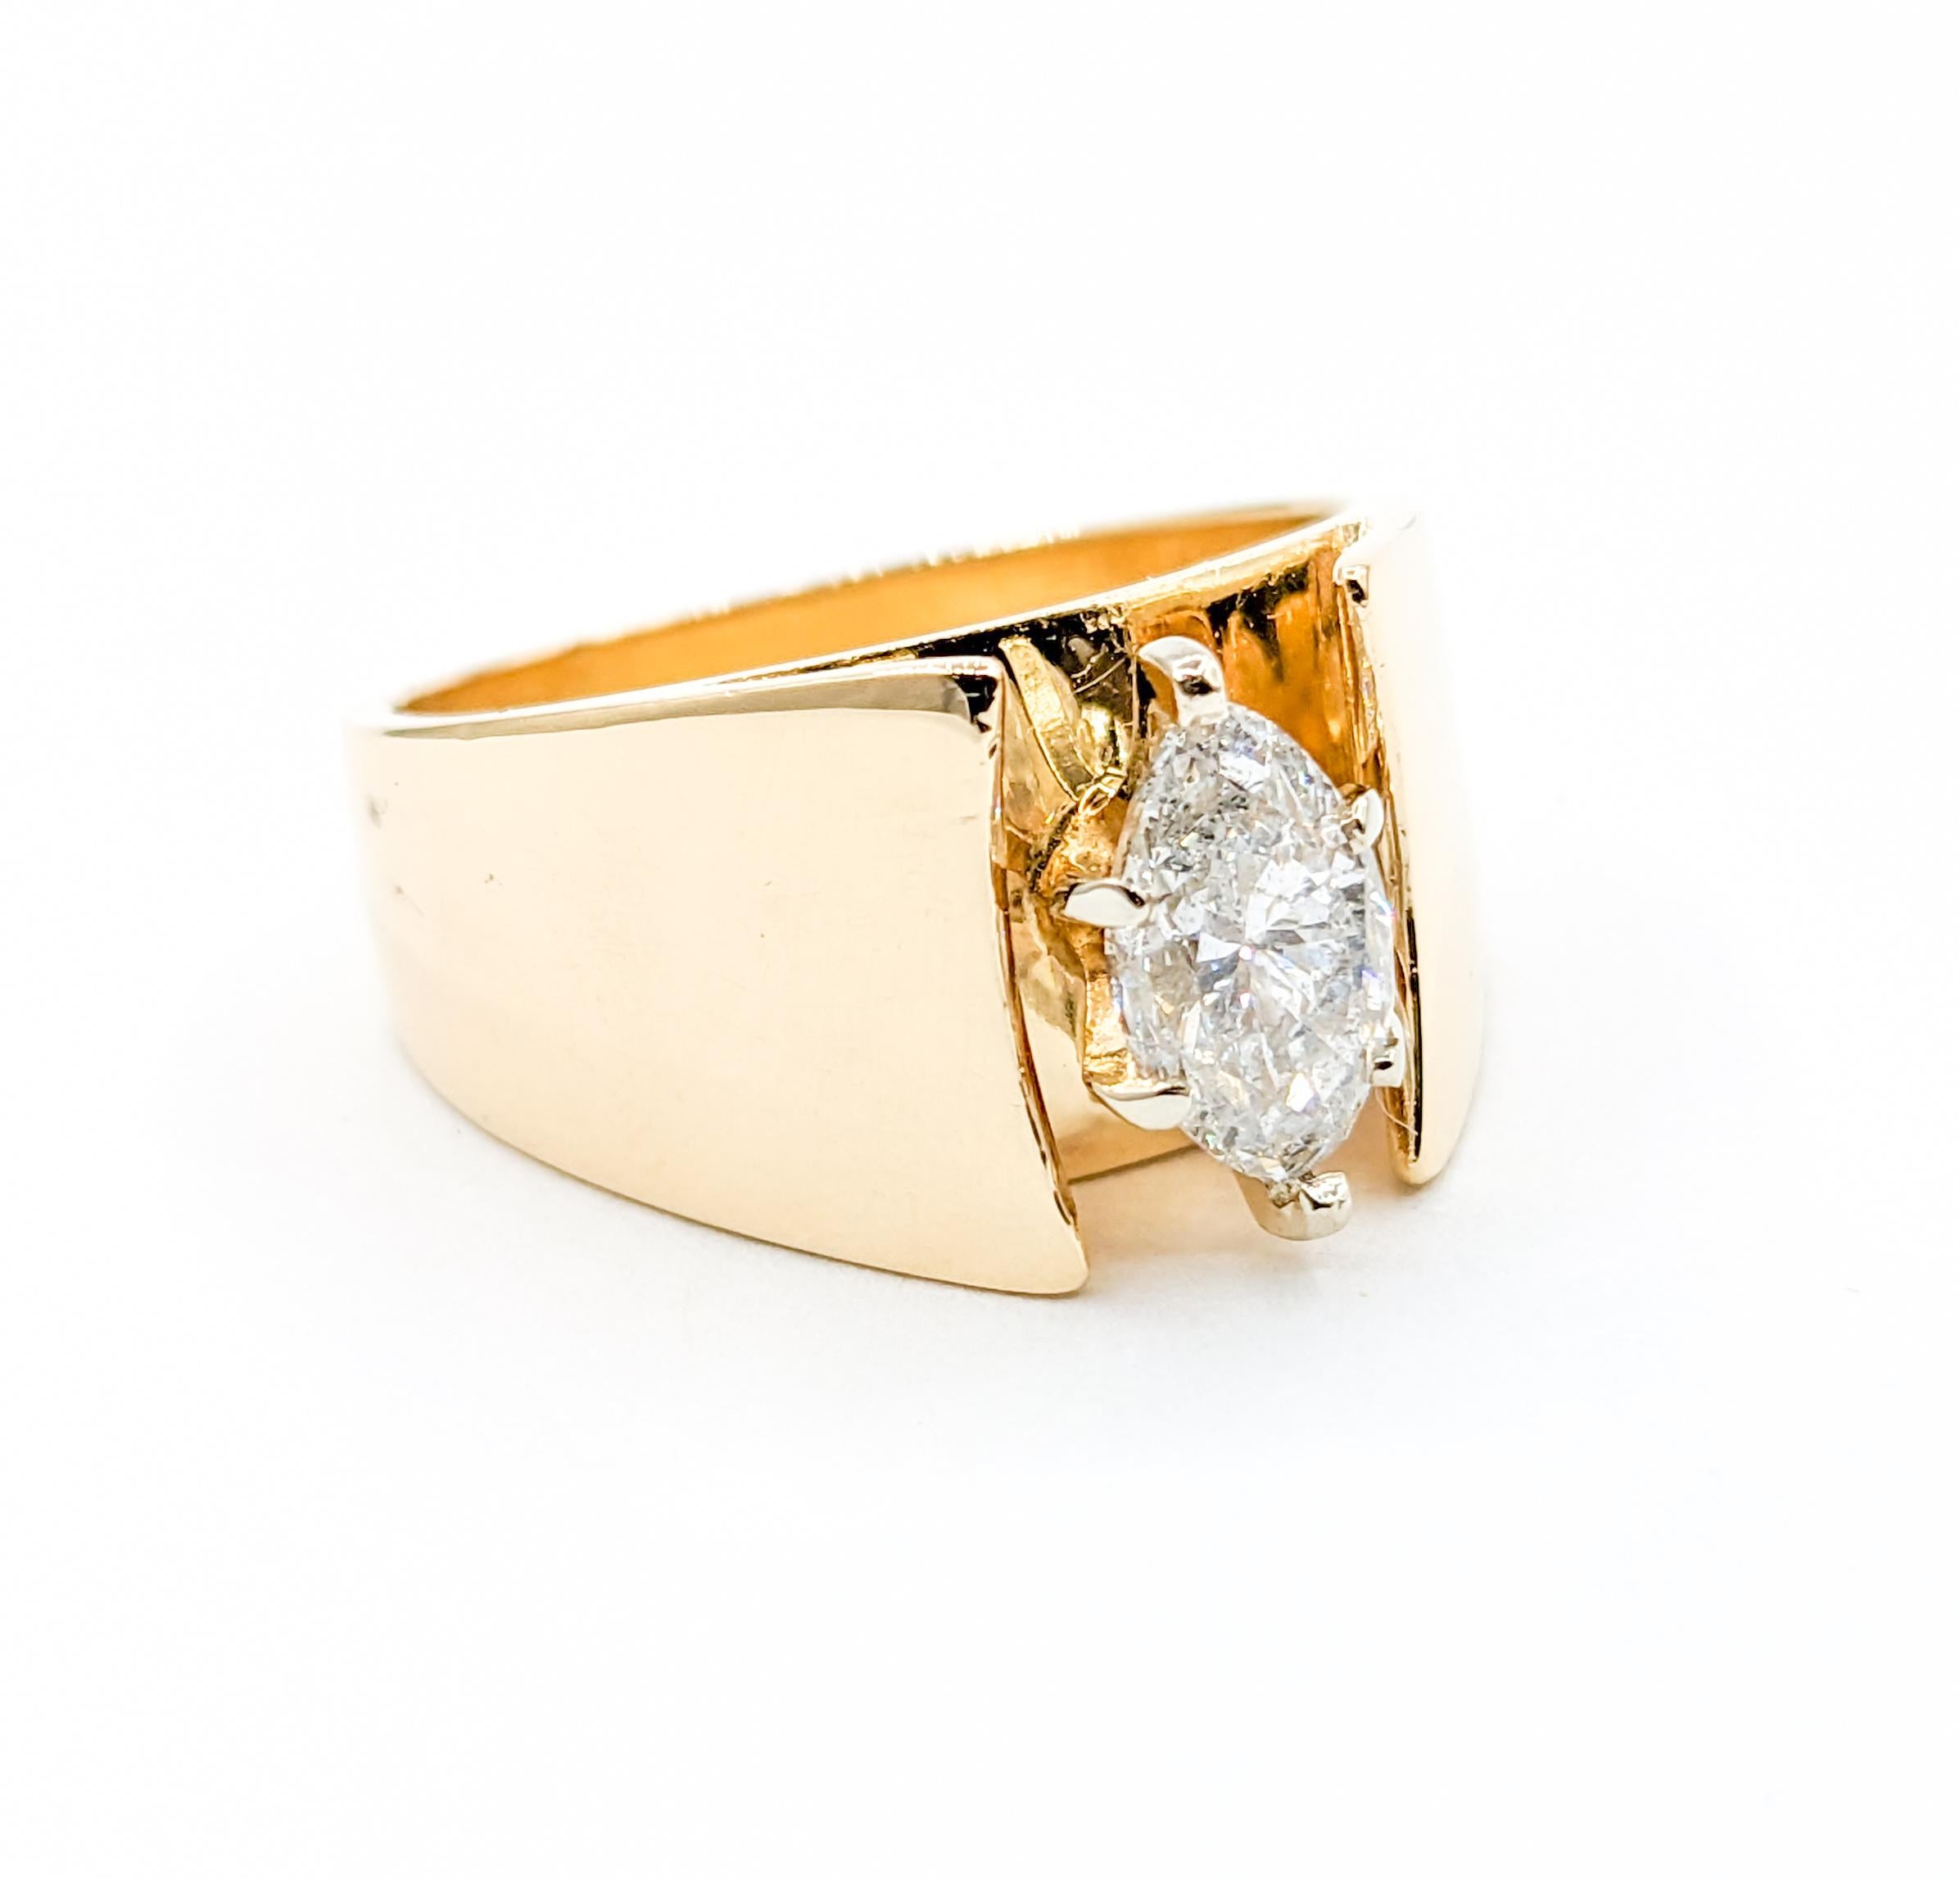 Vintage Marquise Diamond Solitaire Ring in Gold In Excellent Condition For Sale In Bloomington, MN